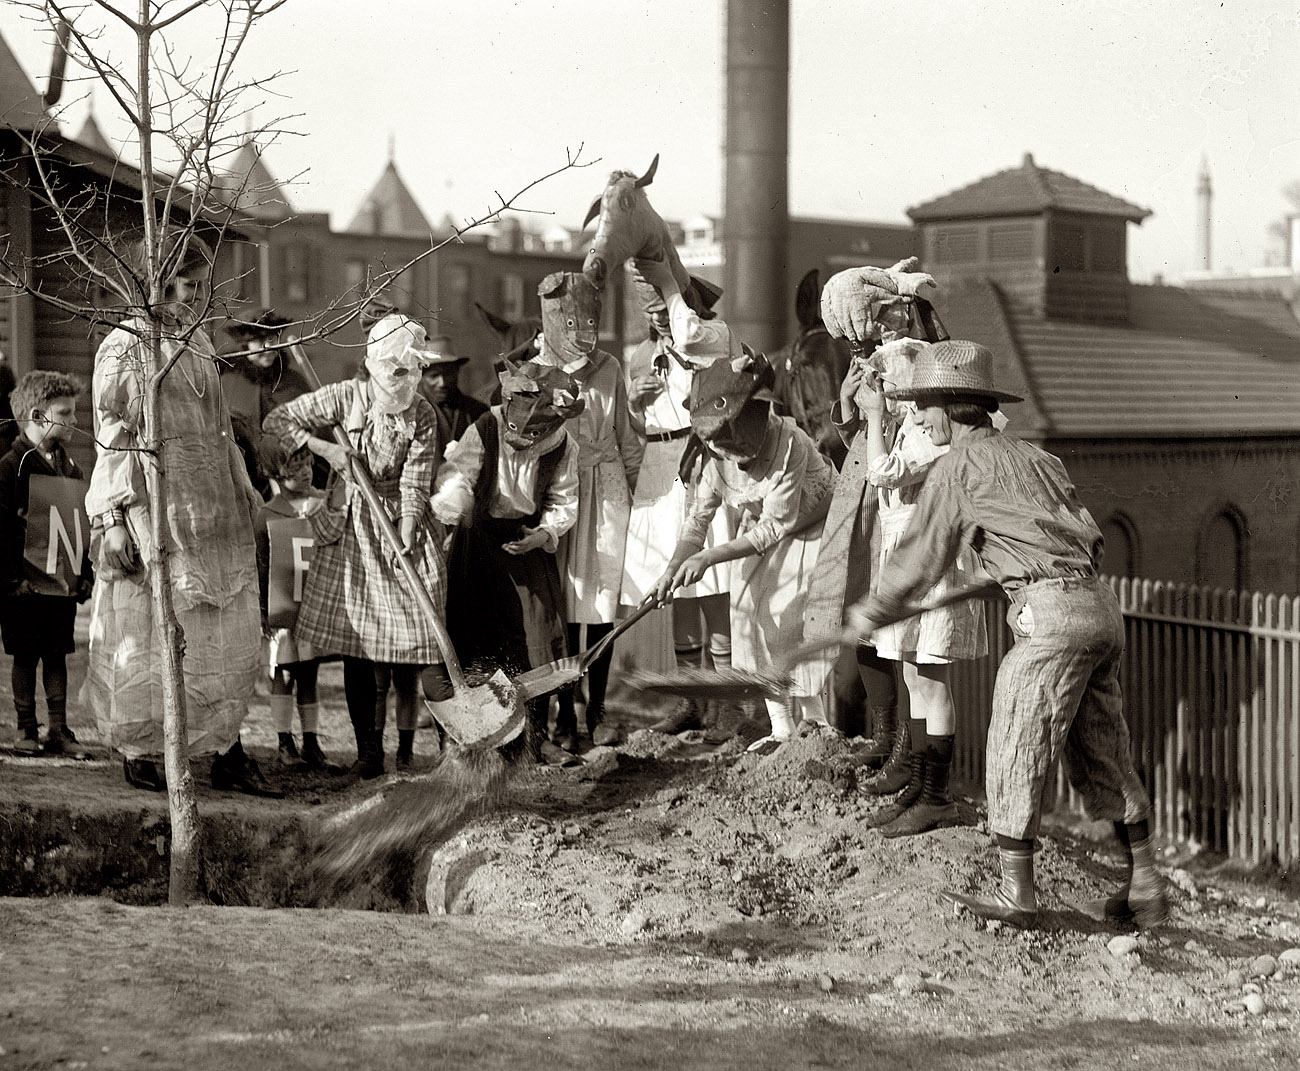 April 15, 1920. Washington, D.C. "Tree planting." View full size. I looked high and low for a good CCC photo in honor of Earth Day, but they were all disappointingly low-res. So it's a National Photo glass negative to the rescue.